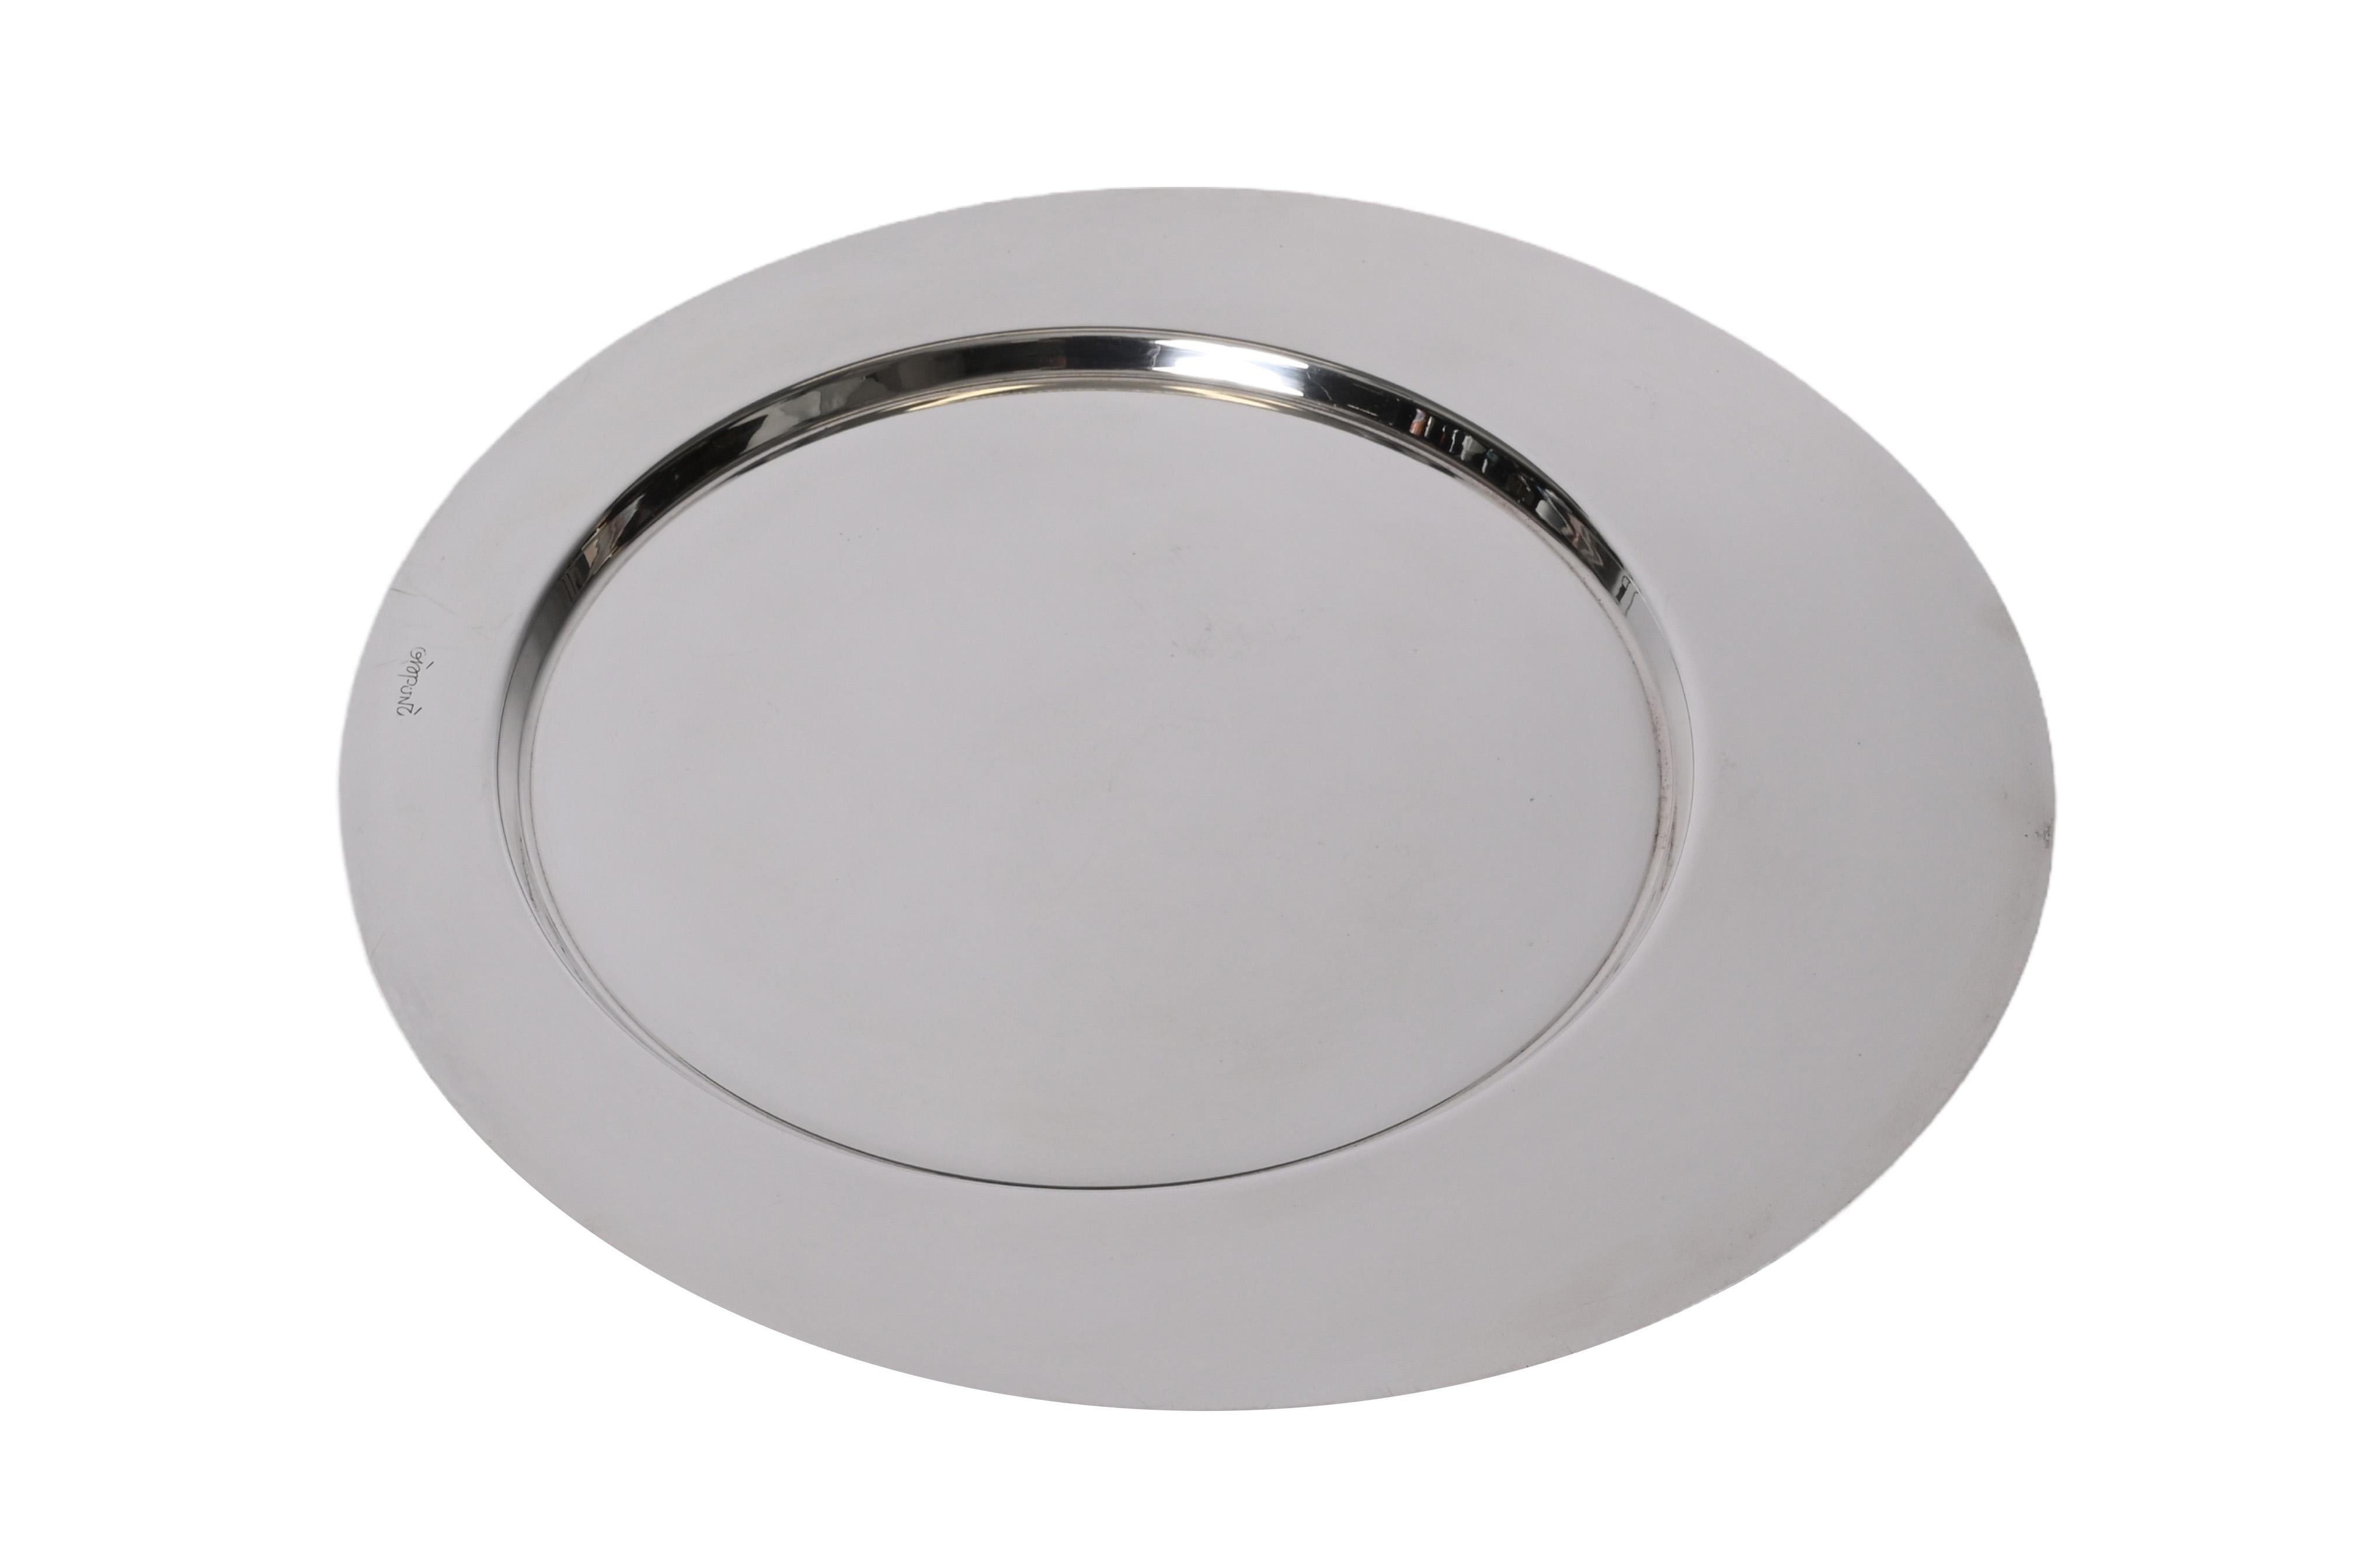 Amazing mid-century silver plate serving plate. Gio Ponti designed and signed this astonishing item for Cleto Munari in Italy during the 1980s.

The flat and efficient design on two round levels, make this piece simply irresistible and iconic for